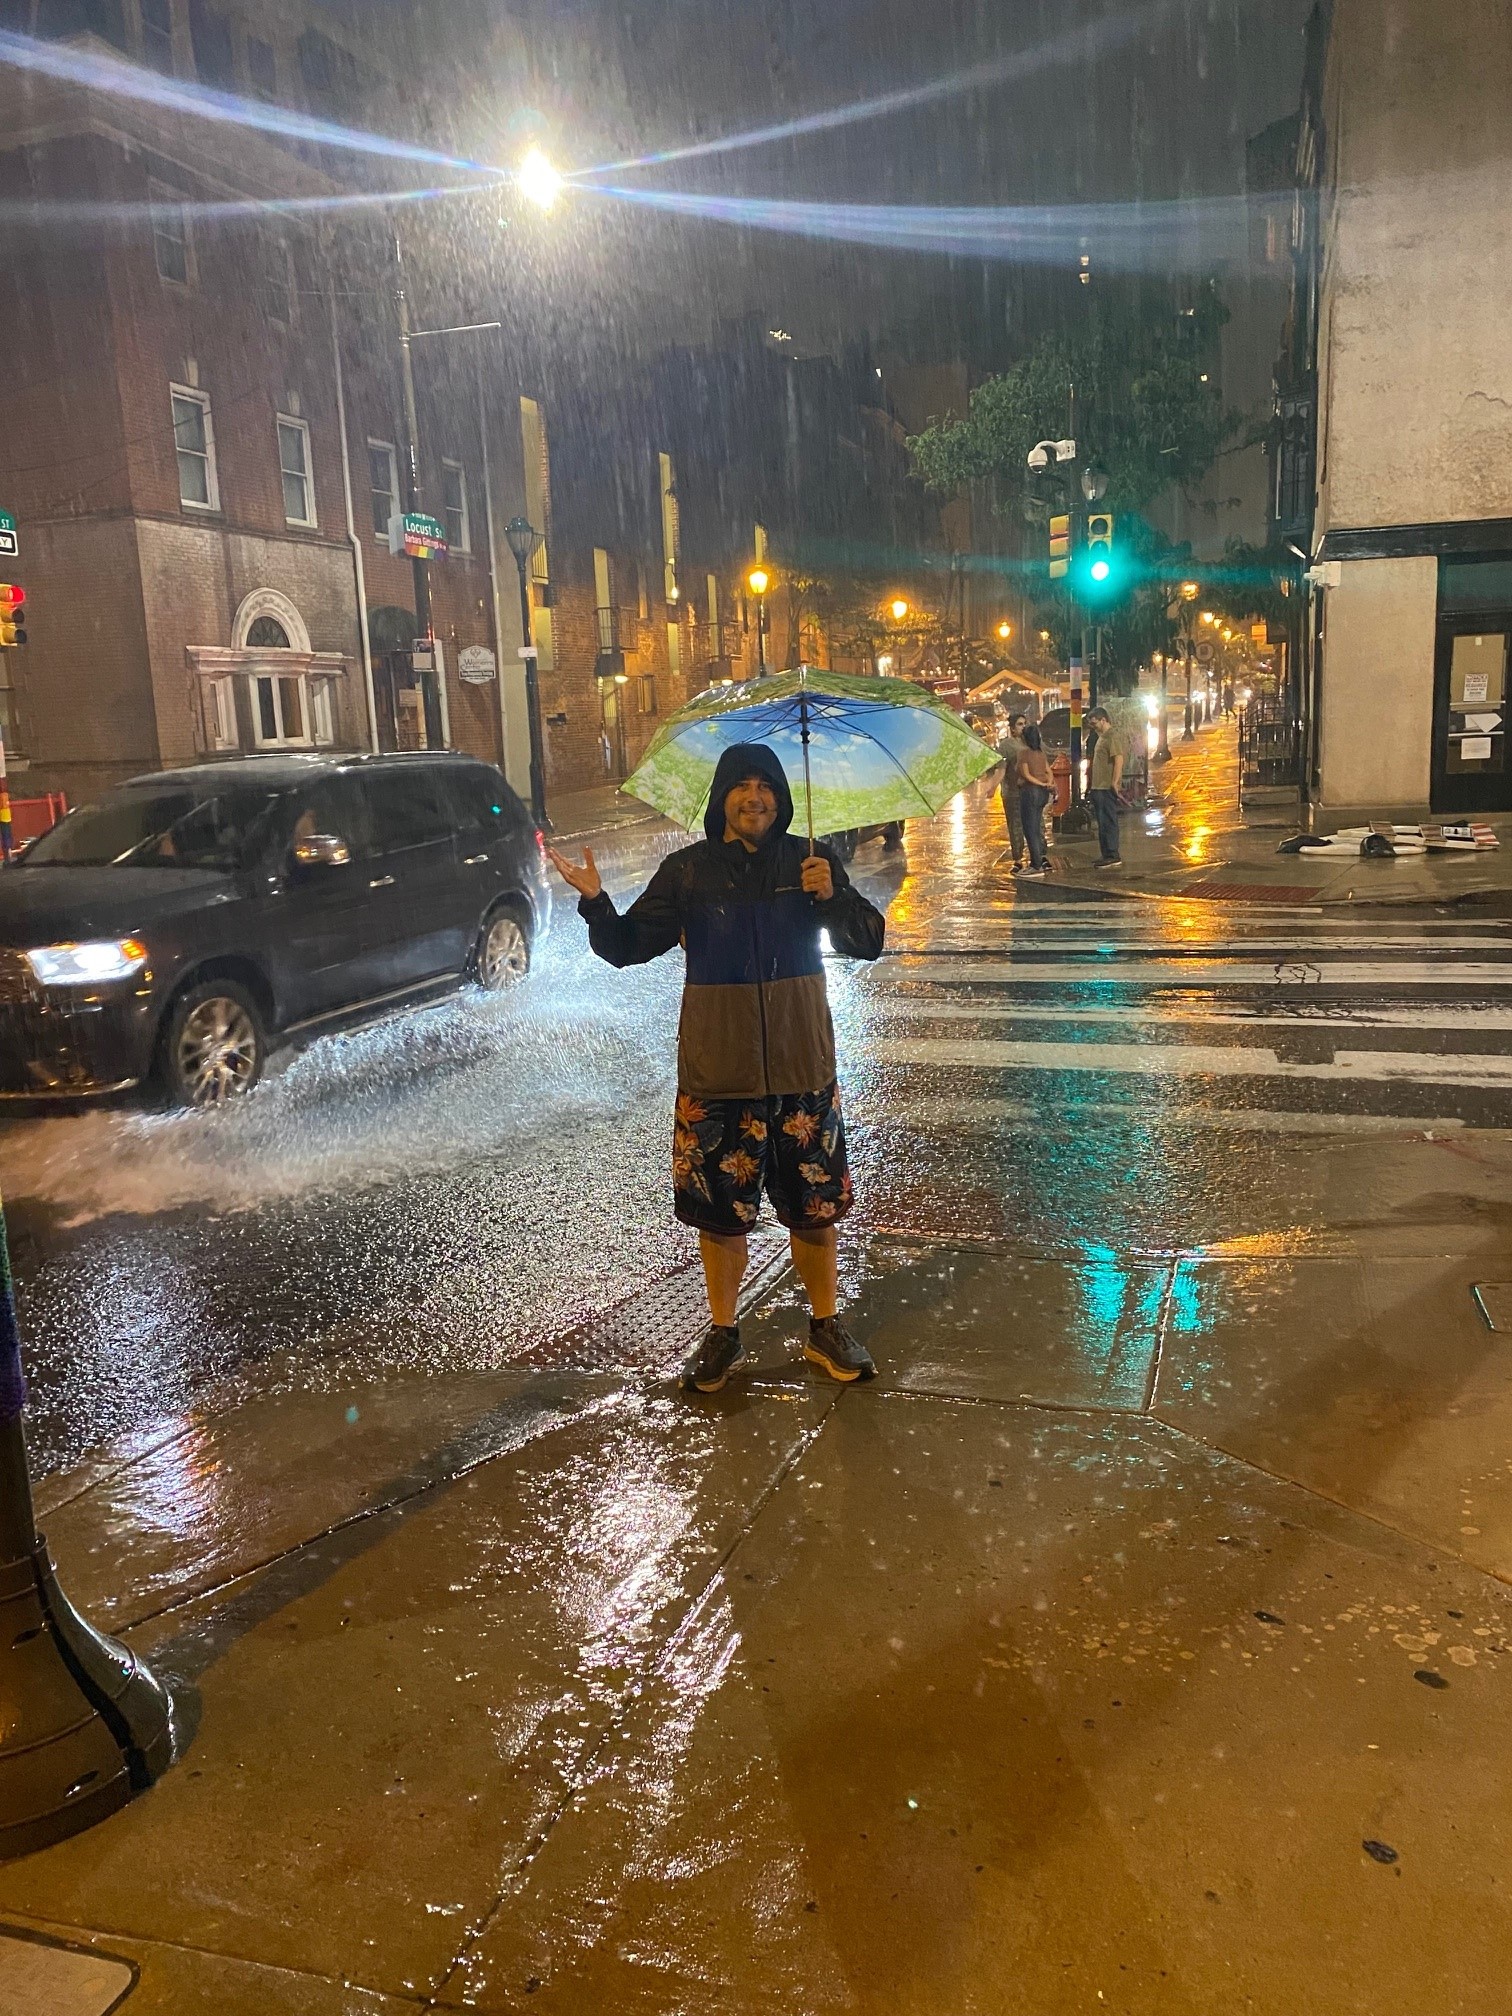 Lee shrugs in the Philly rain.